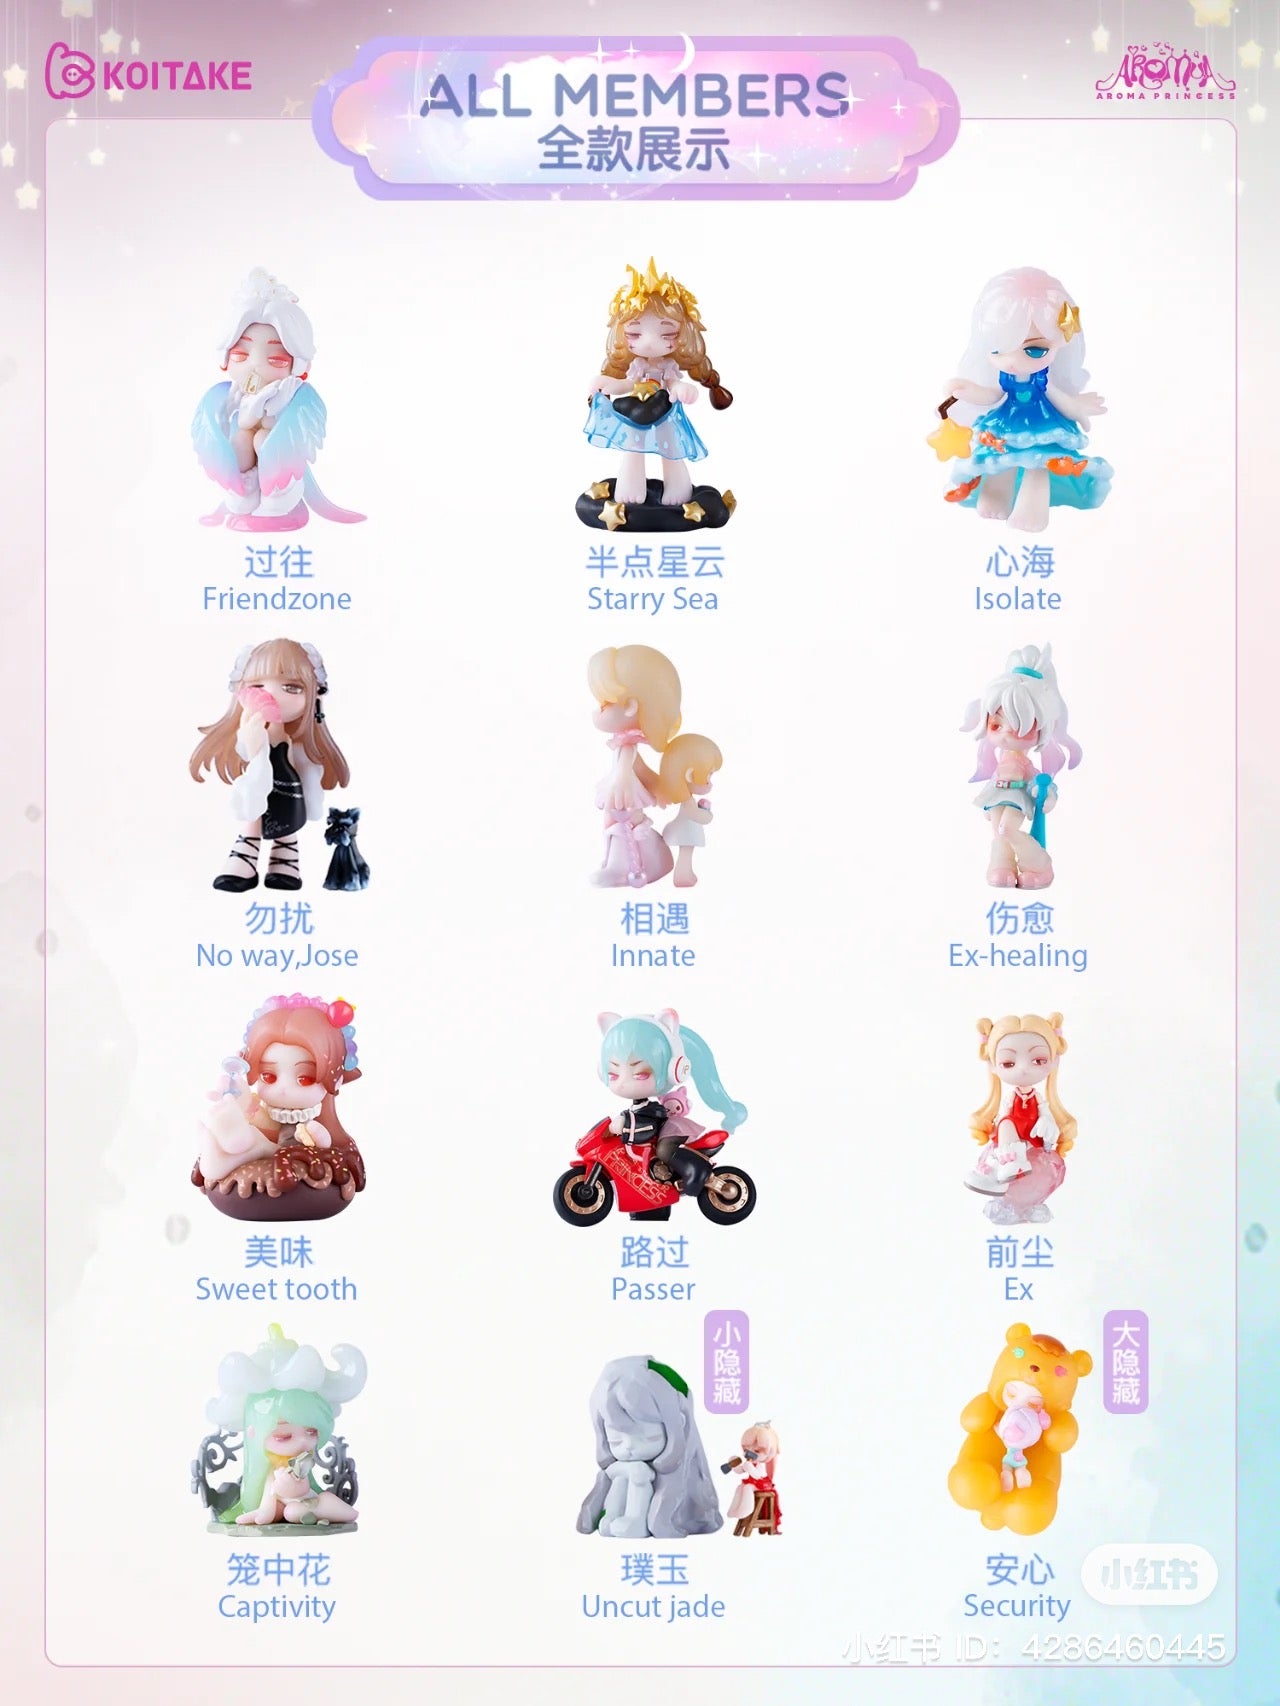 A group of cartoon characters and toy figurines, including a girl, angel, and motorcycle rider, from the Aroma Princess Between Us Blind Box Series at Strangecat Toys.